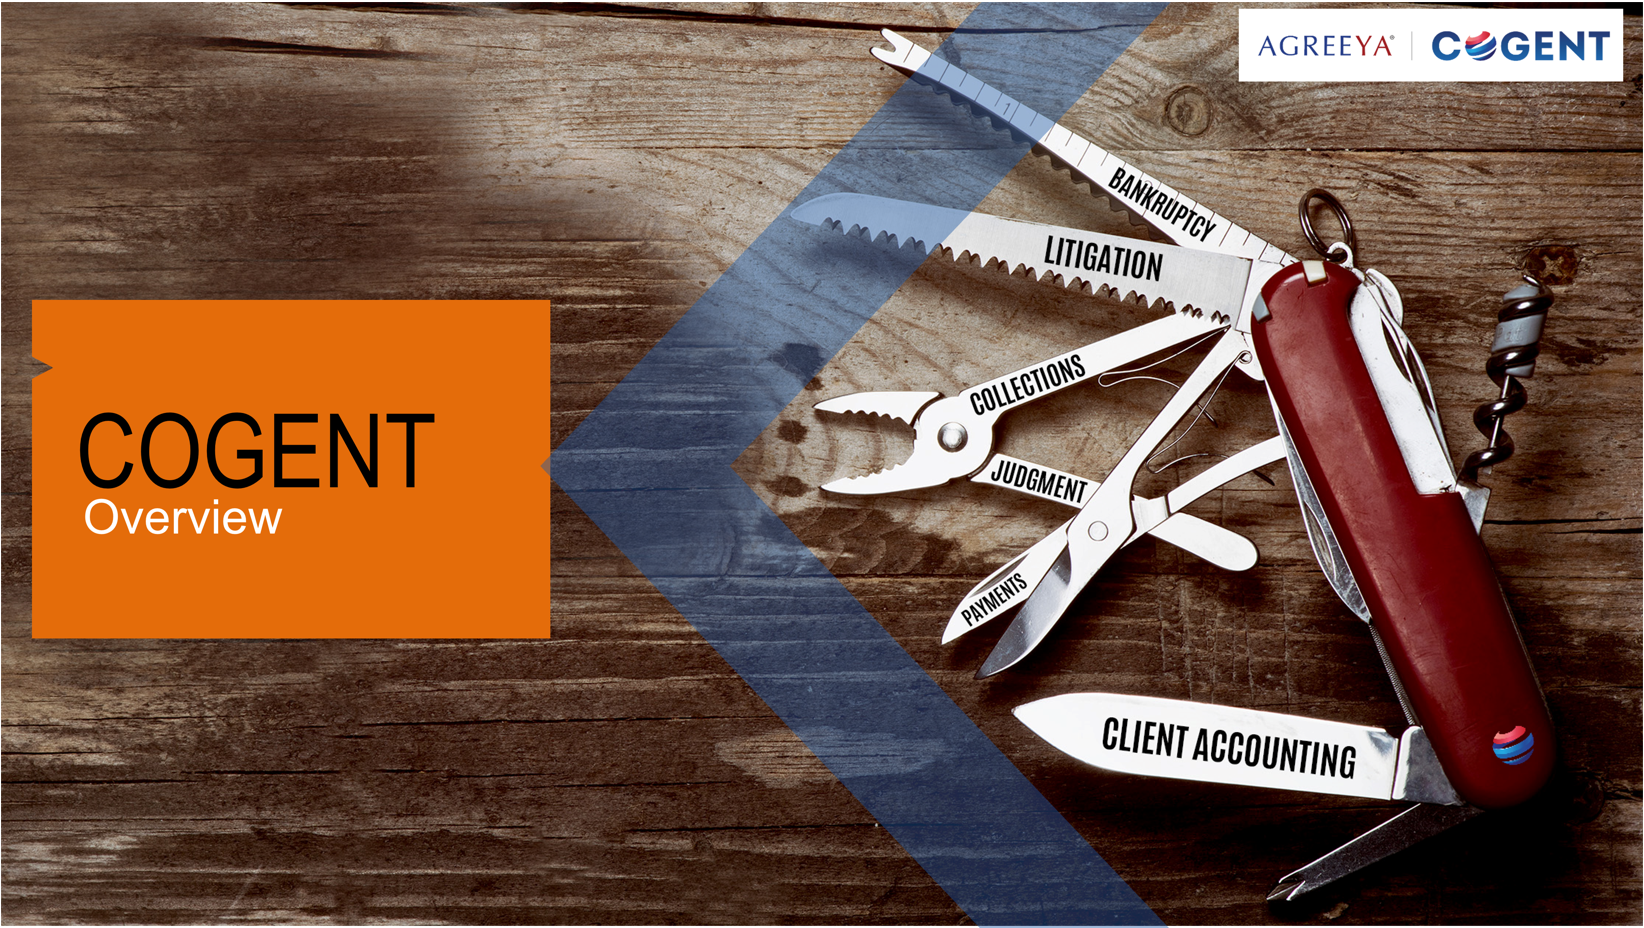 The Swiss Army knife of Receivables, Collections and Litigation Management